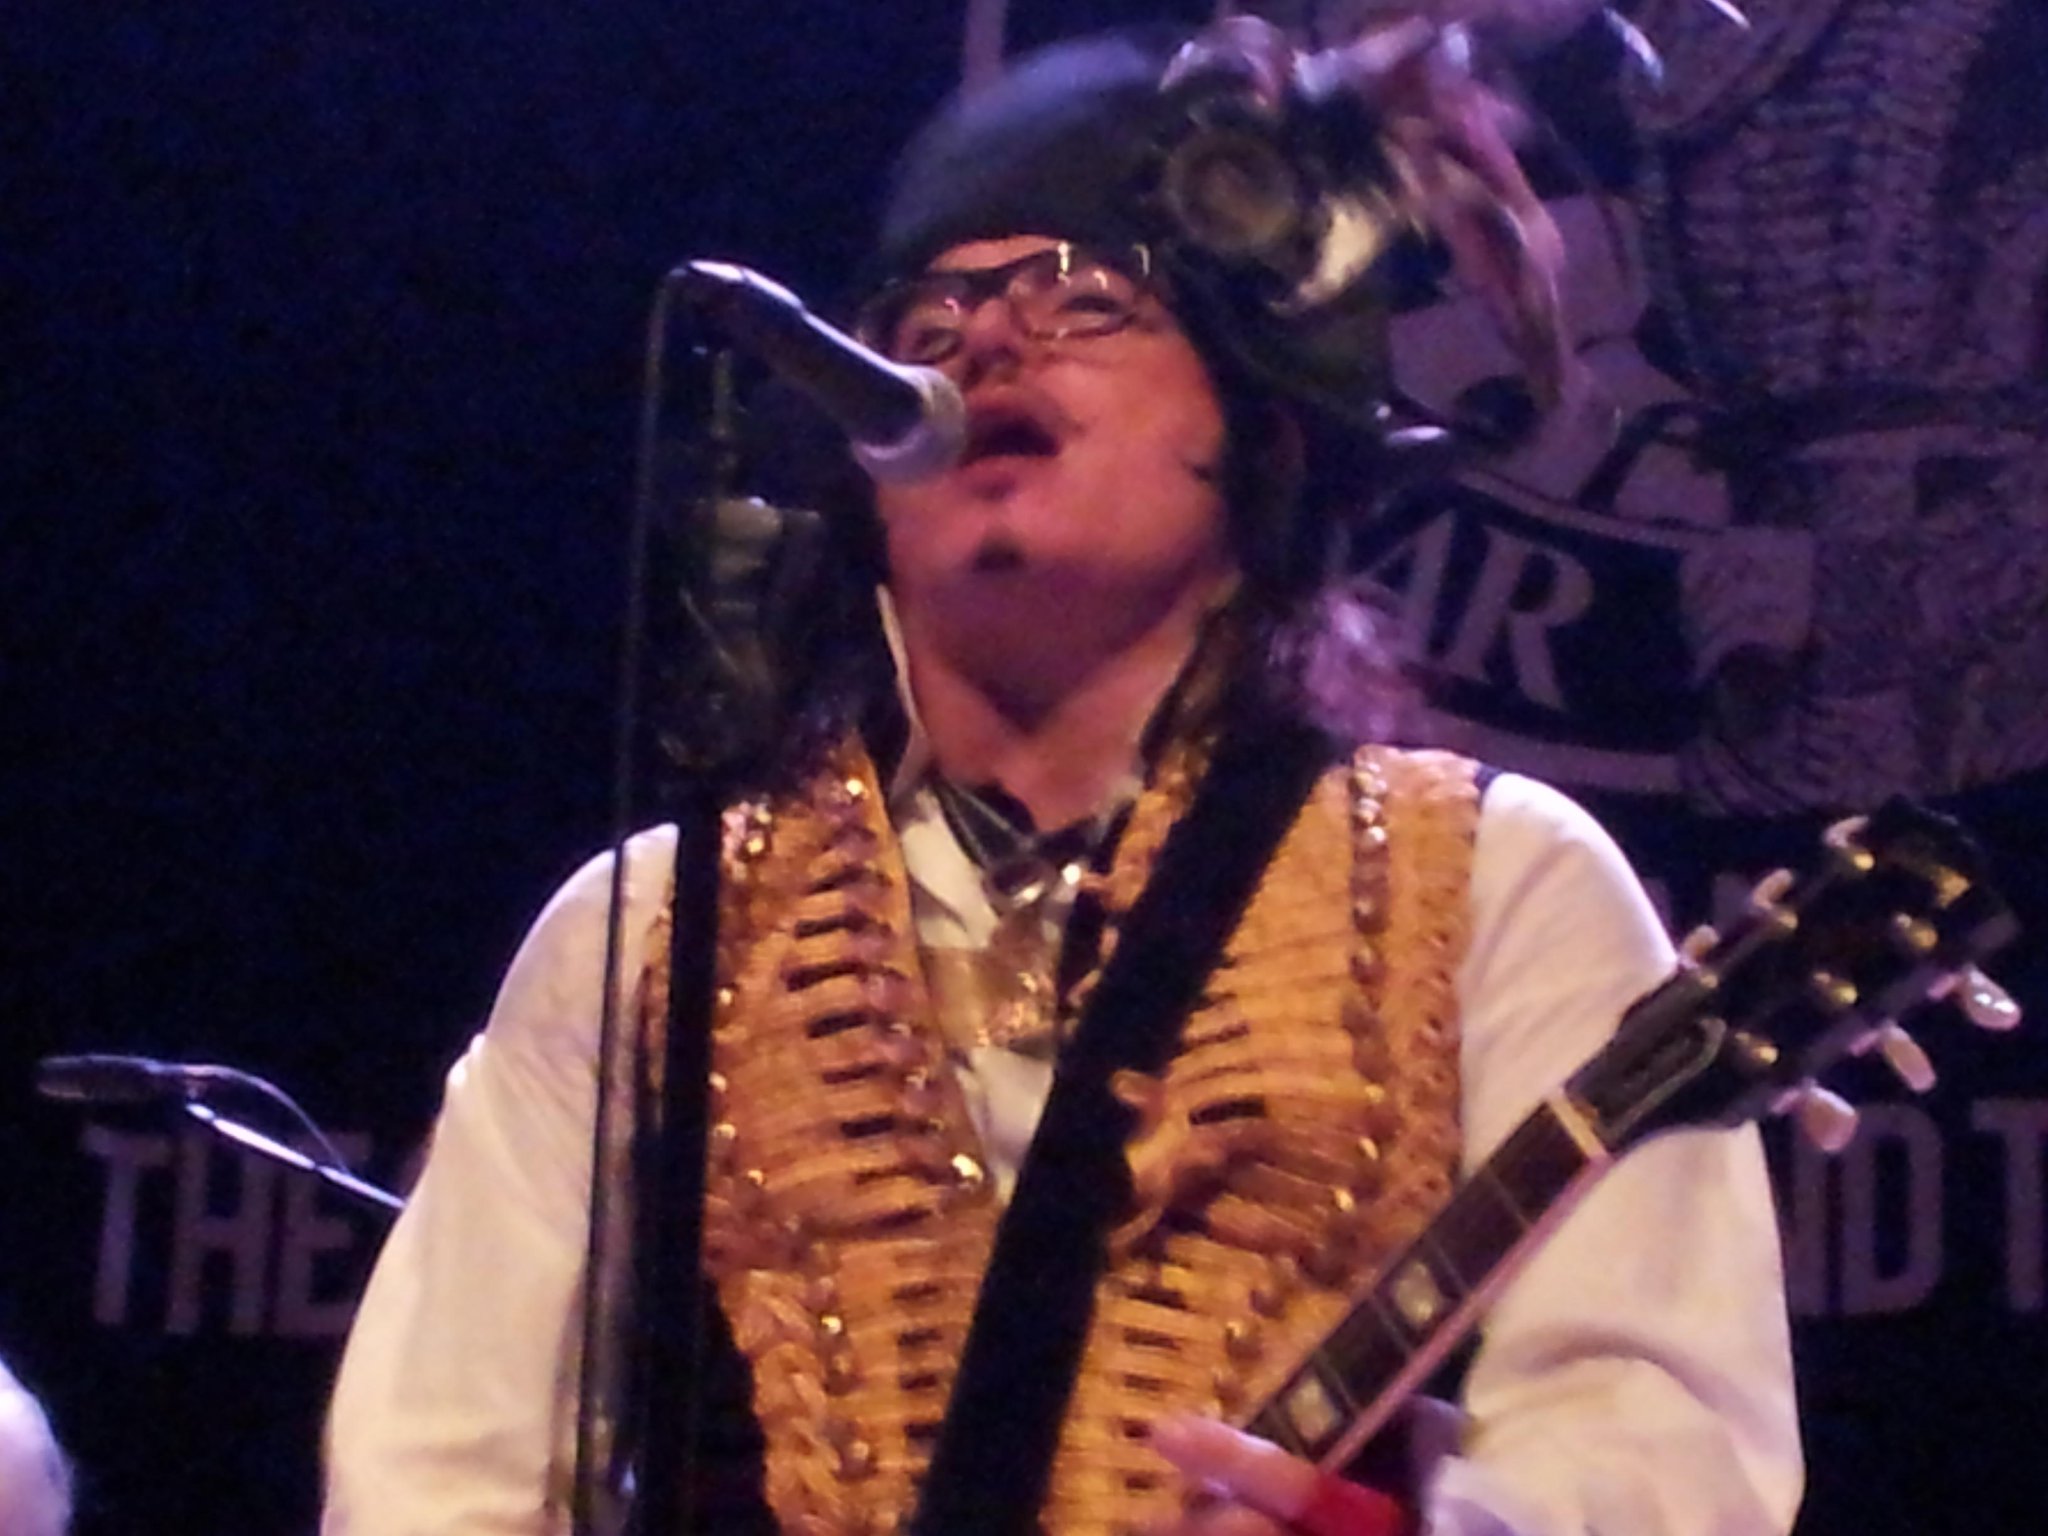 HAPPY 60th BIRTHDAY ADAM ANT!! Love this pic. I cried when he sang Wonderful in Liverpool 2 yrs ago 